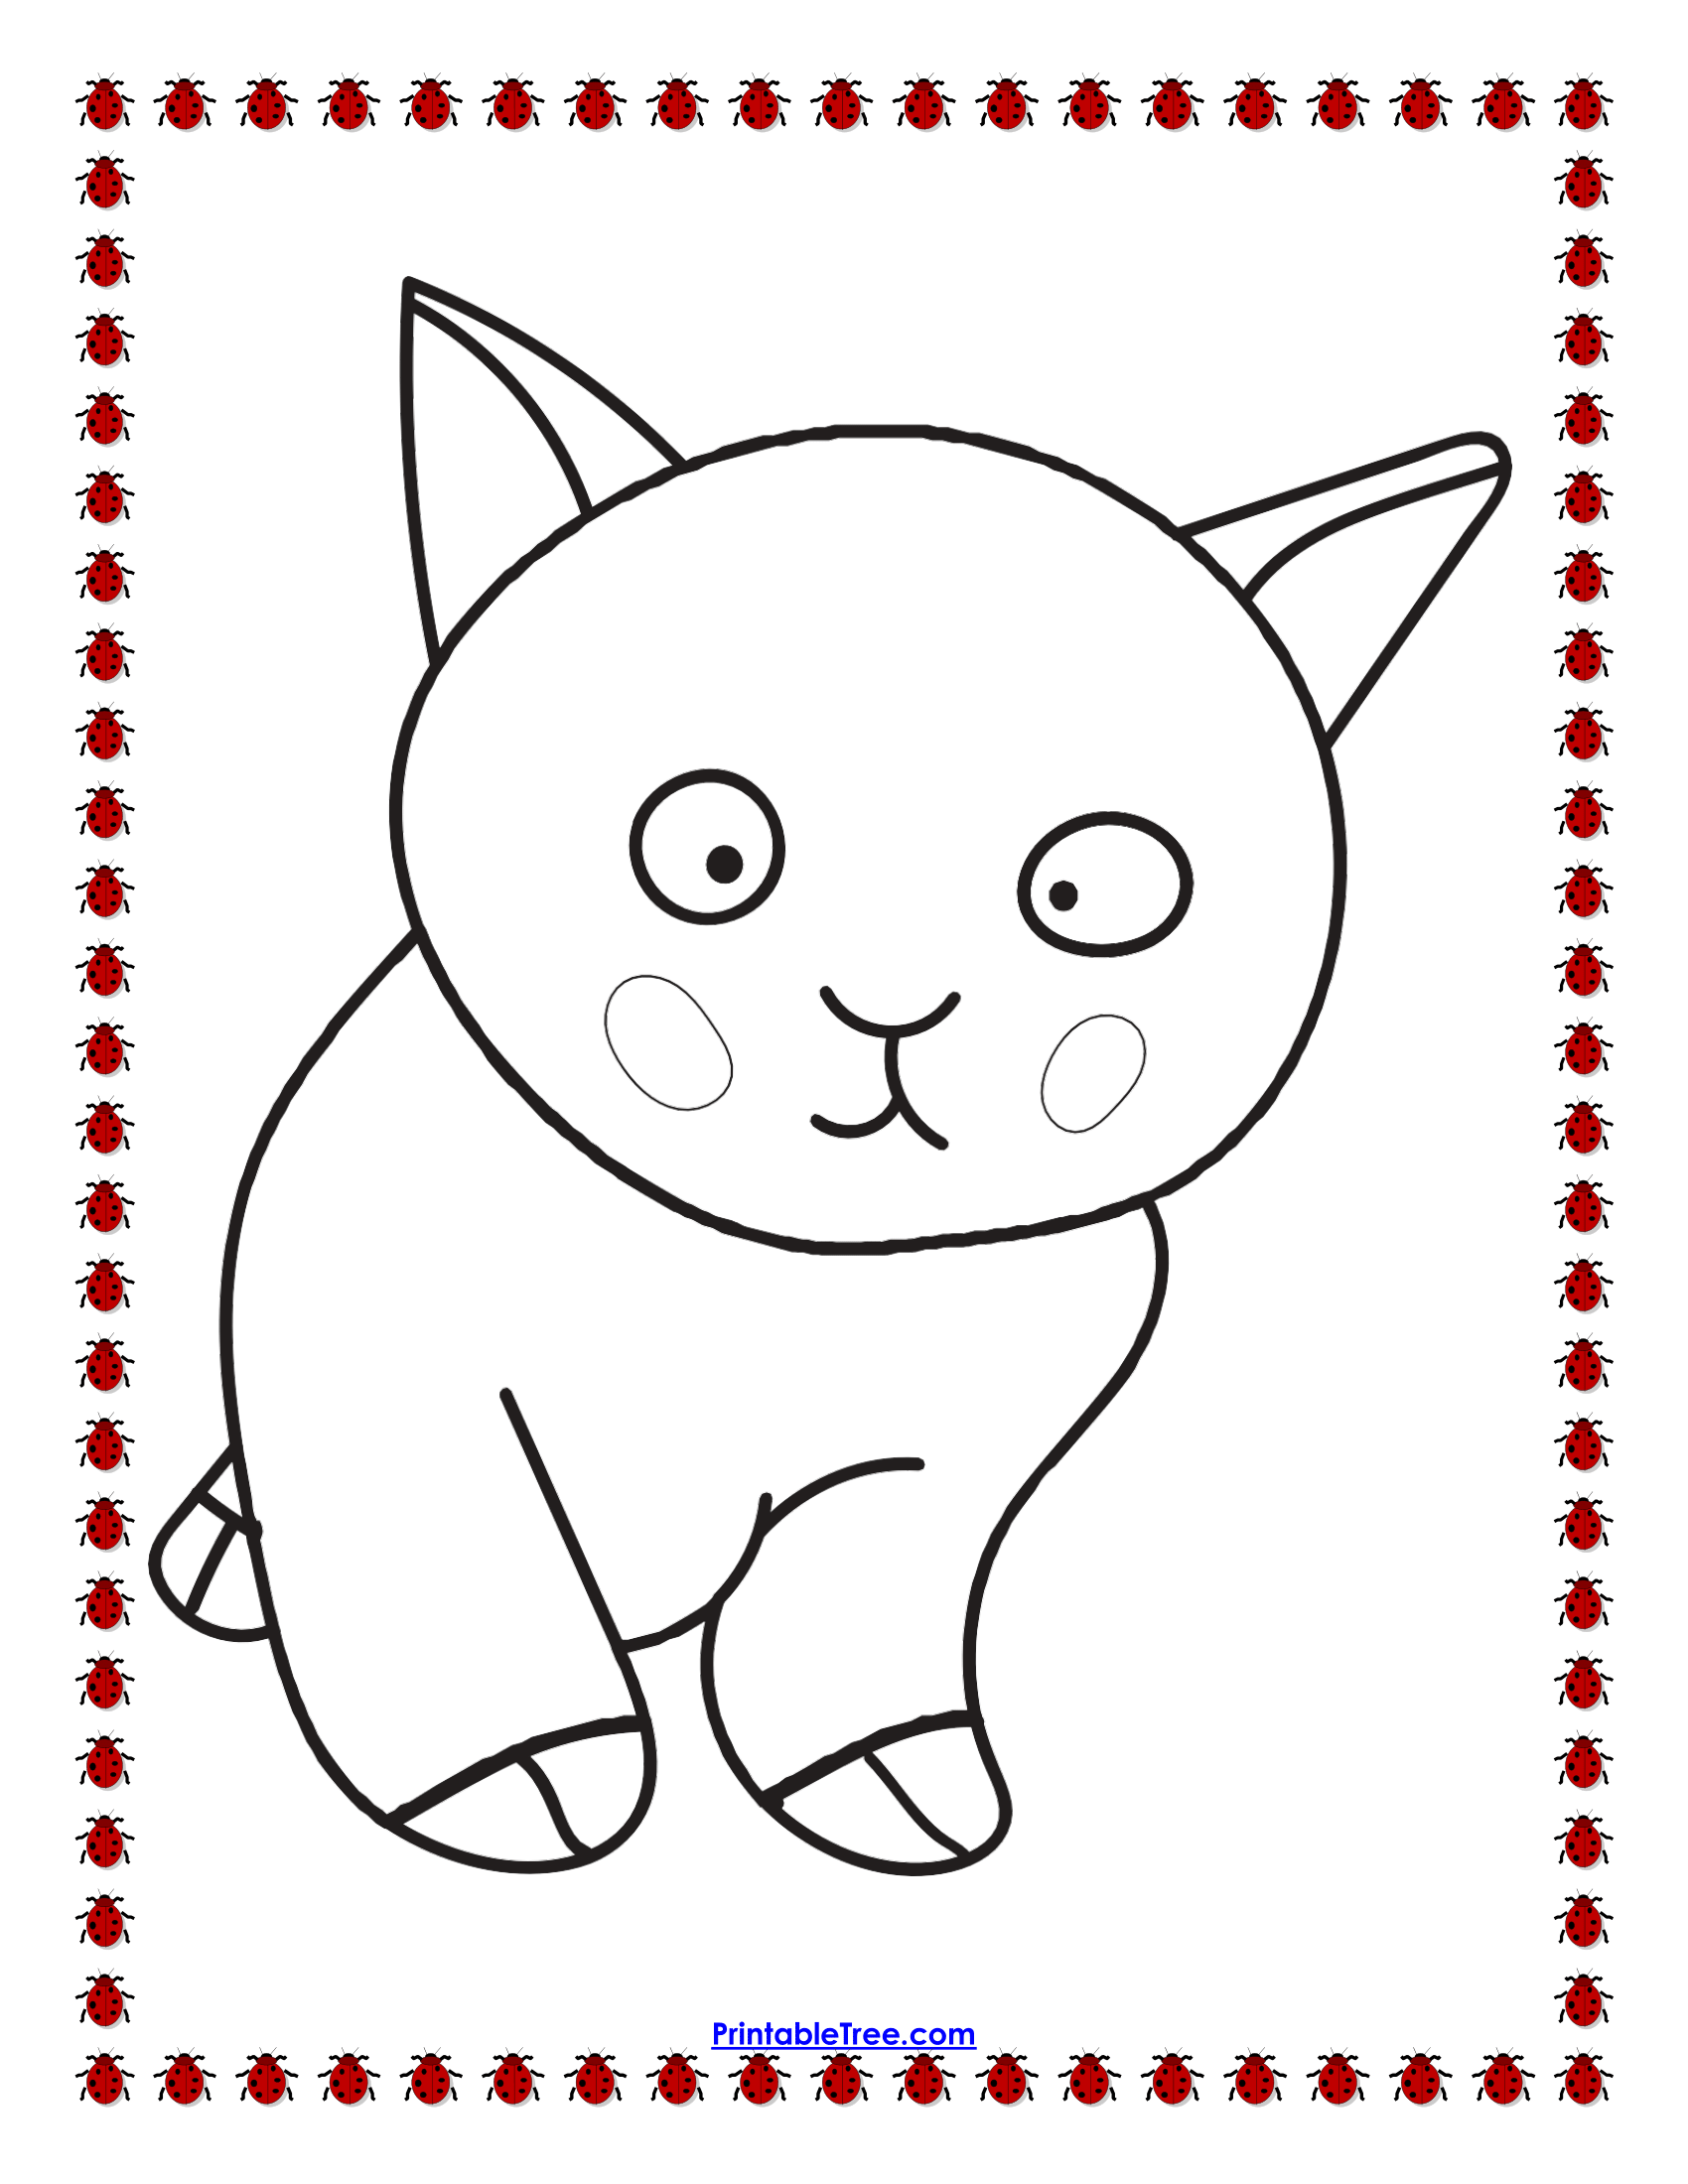 Free printable cat coloring pages pdf for kids and adults